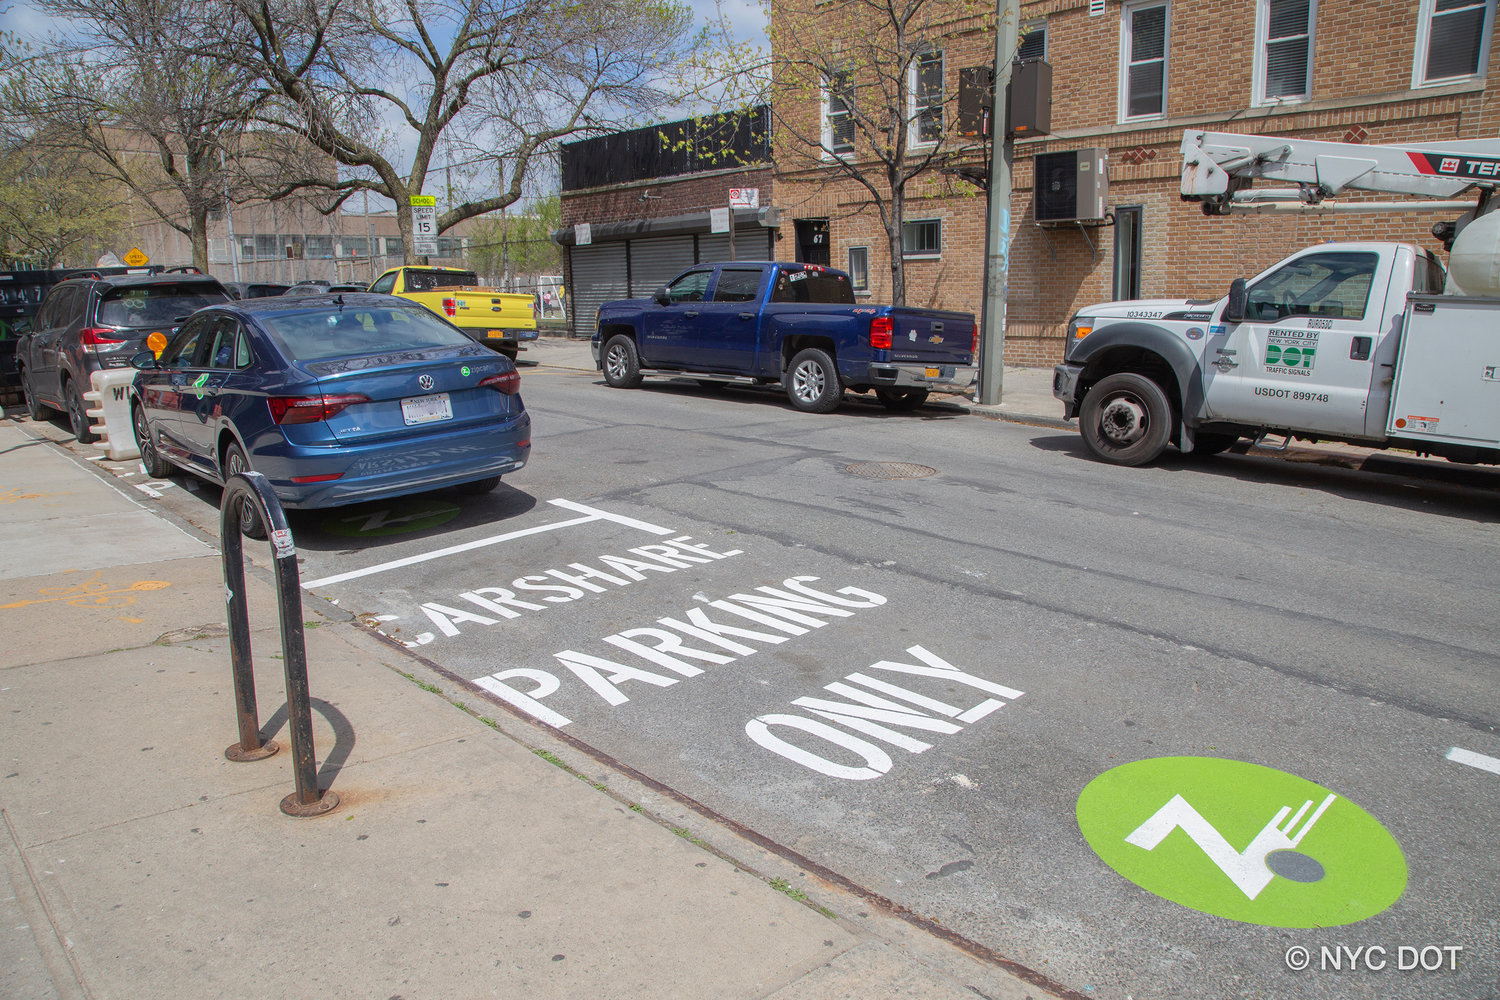 Sometime next year, Zipcar will join three sites in the northwest Bronx in partnership with the city’s transportation department. Within each site, two parking spaces will be used, and the DOT will charge the company an annual fee of $475 per permit. The car-sharing company can charge as low as $11 per hour or $83 per day on select models.